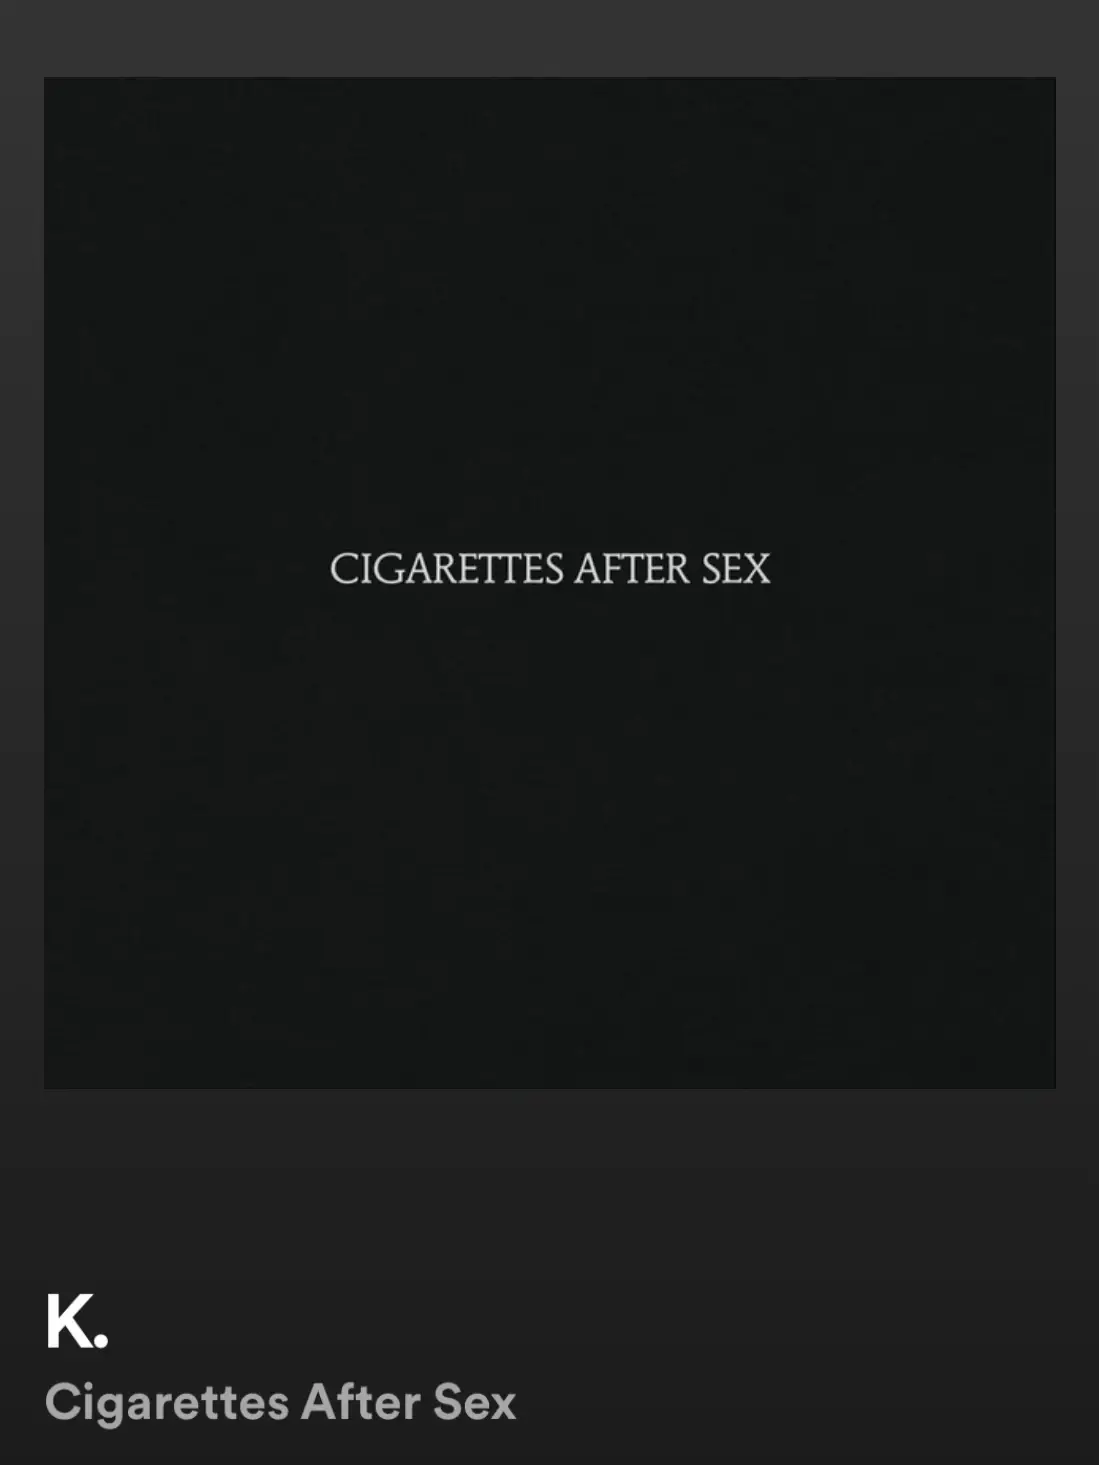  A poster with the words Cigarettes After Sex on it.